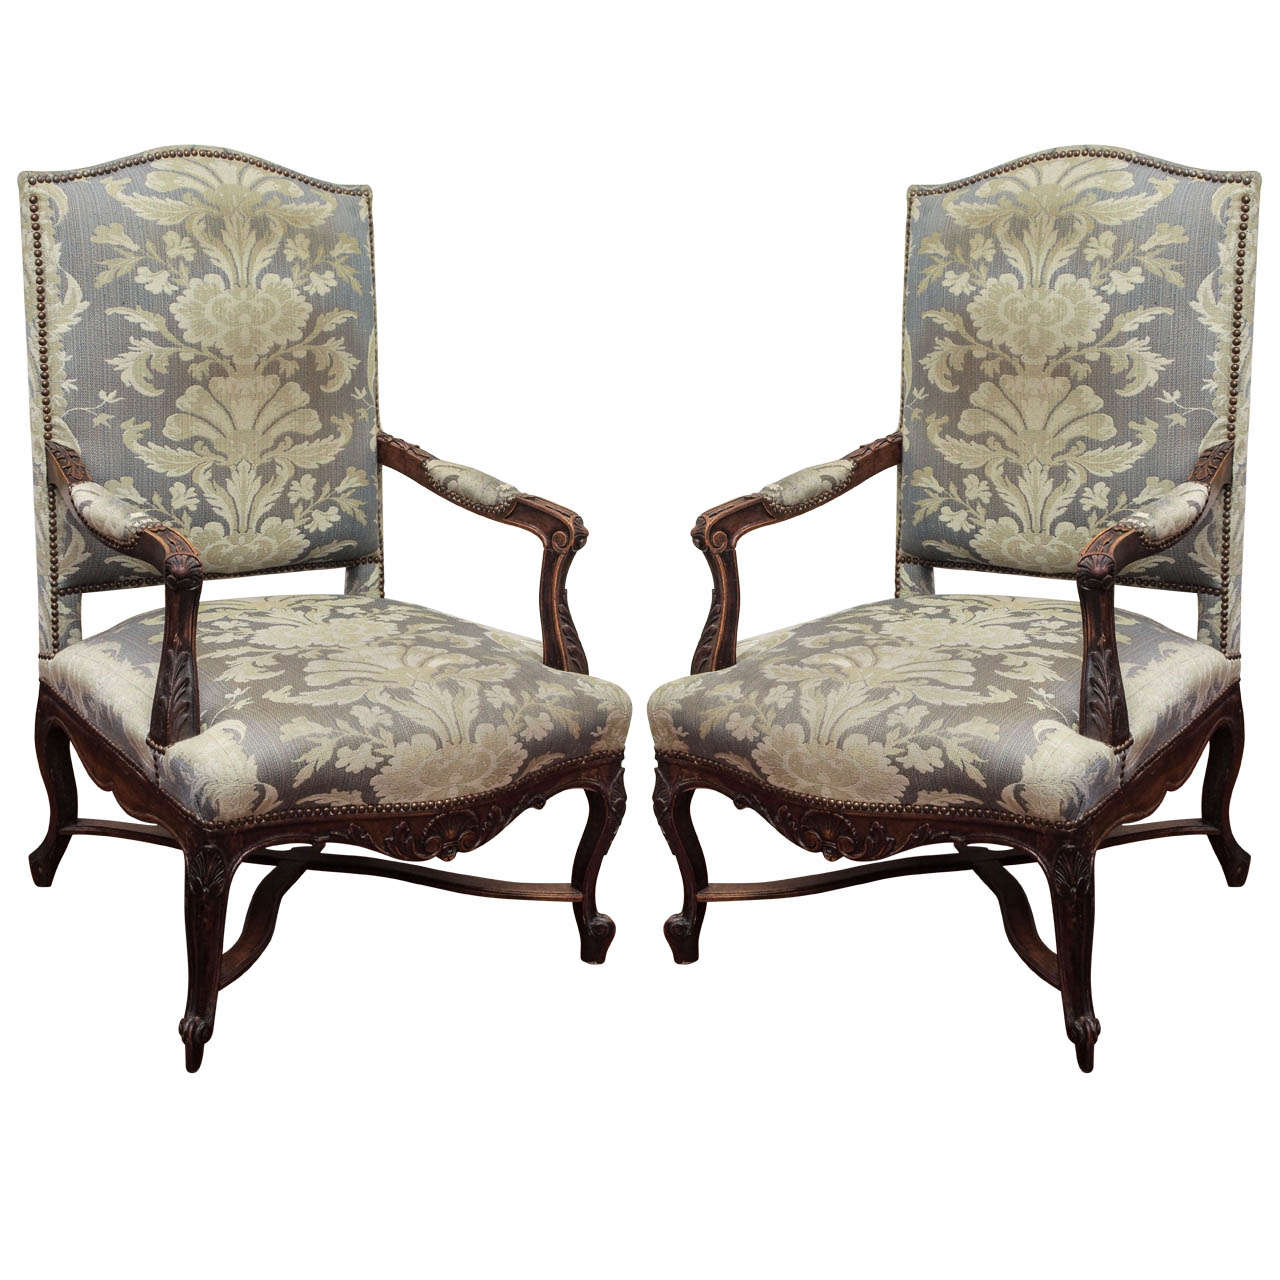 Pair of Regence Style Fauteuils